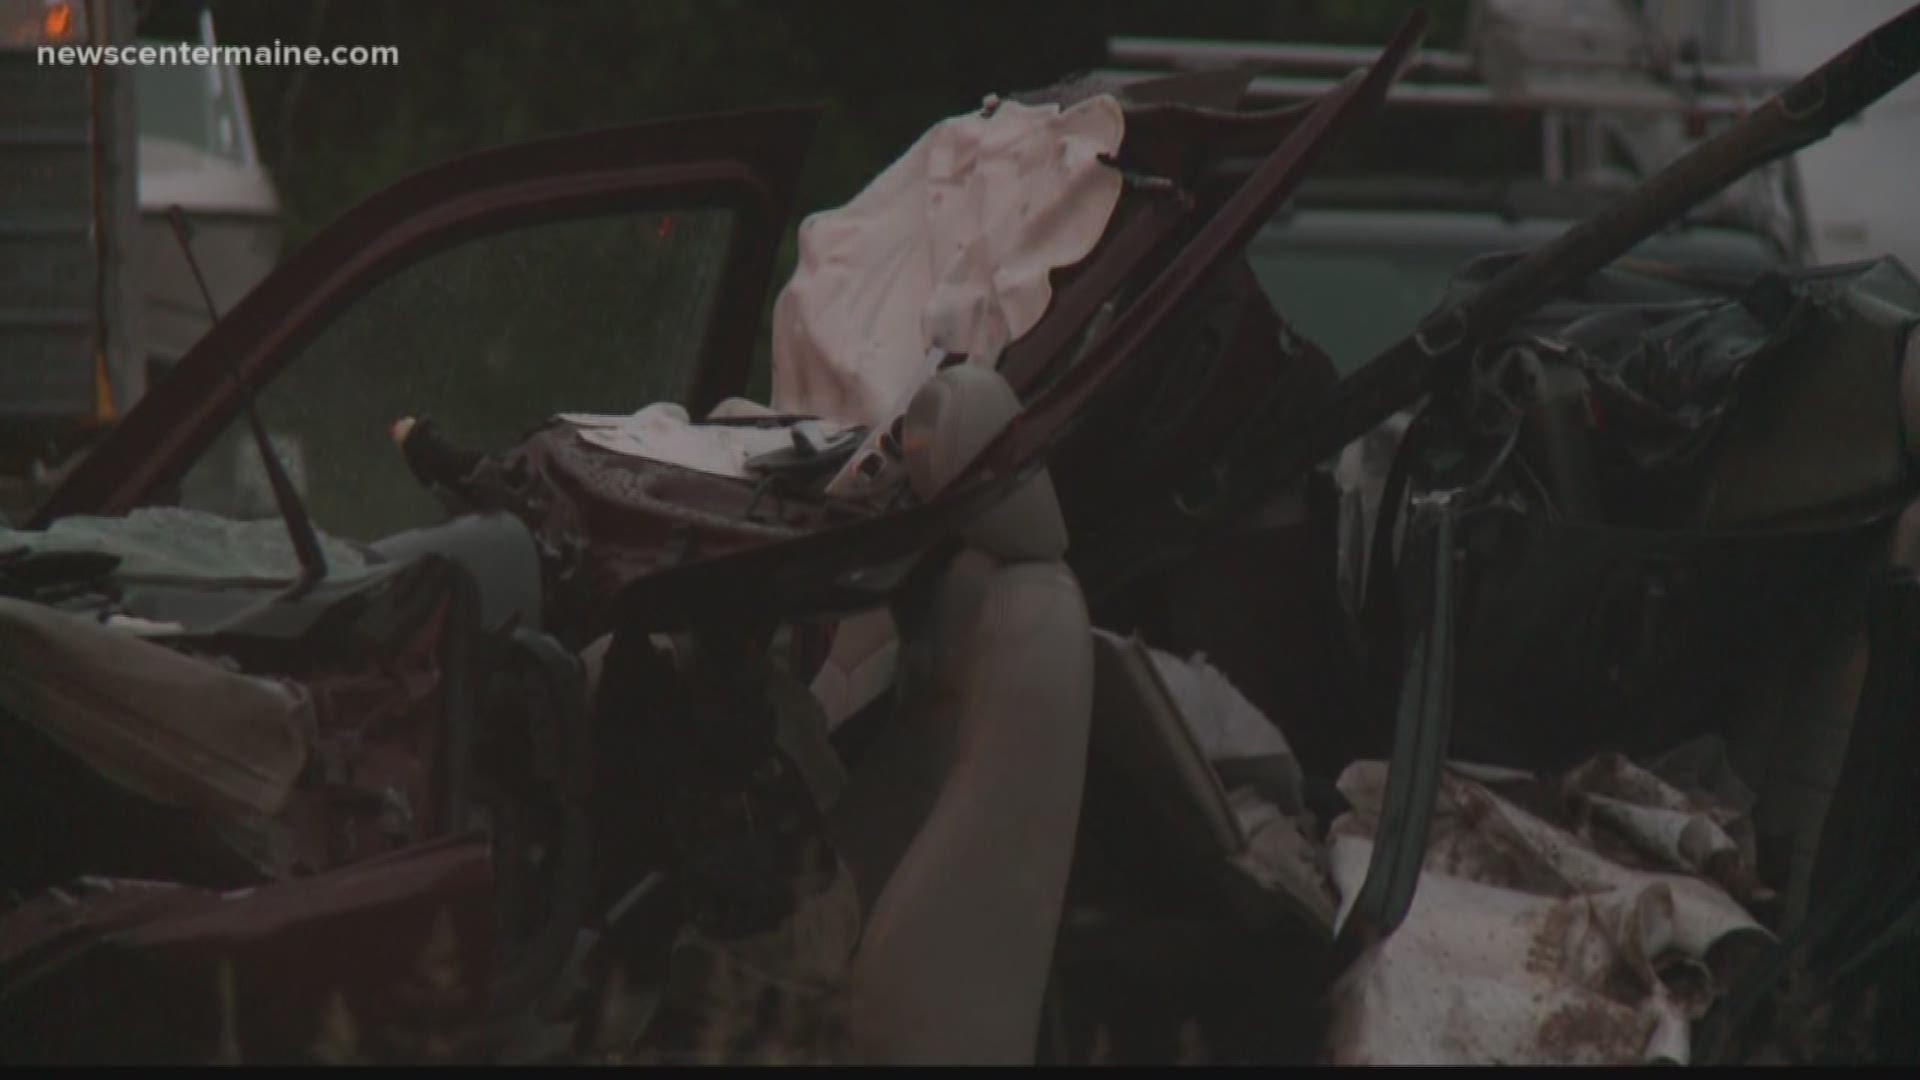 Mother, daughter killed in two vehicle crash in Casco.